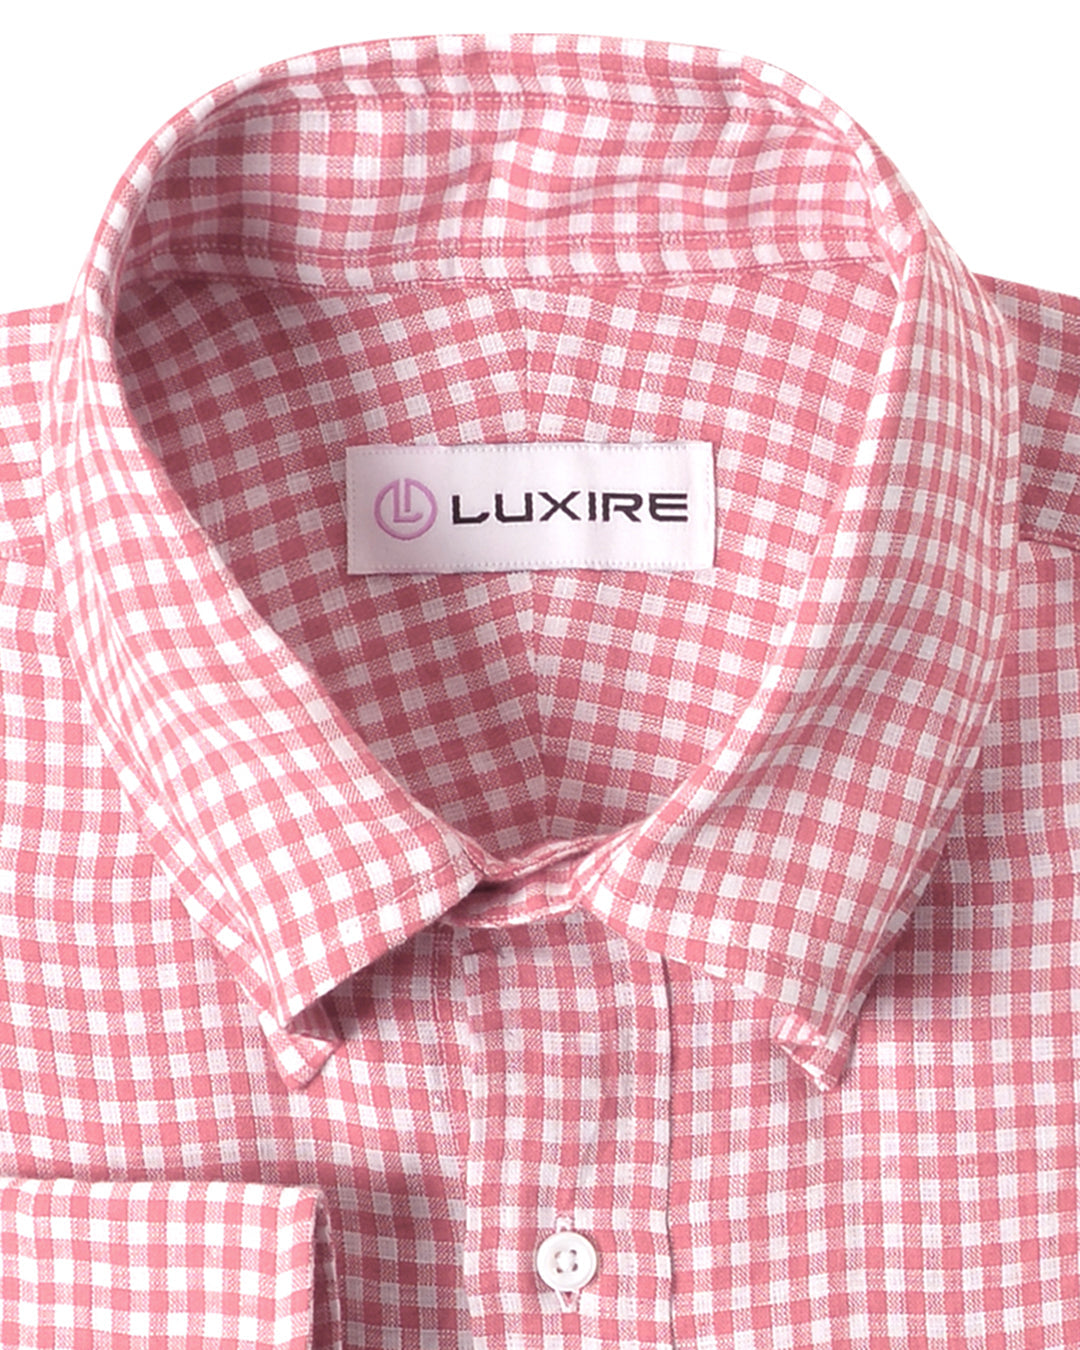 Collar of the custom linen shirt for men in pink salmon by Luxire Clothing